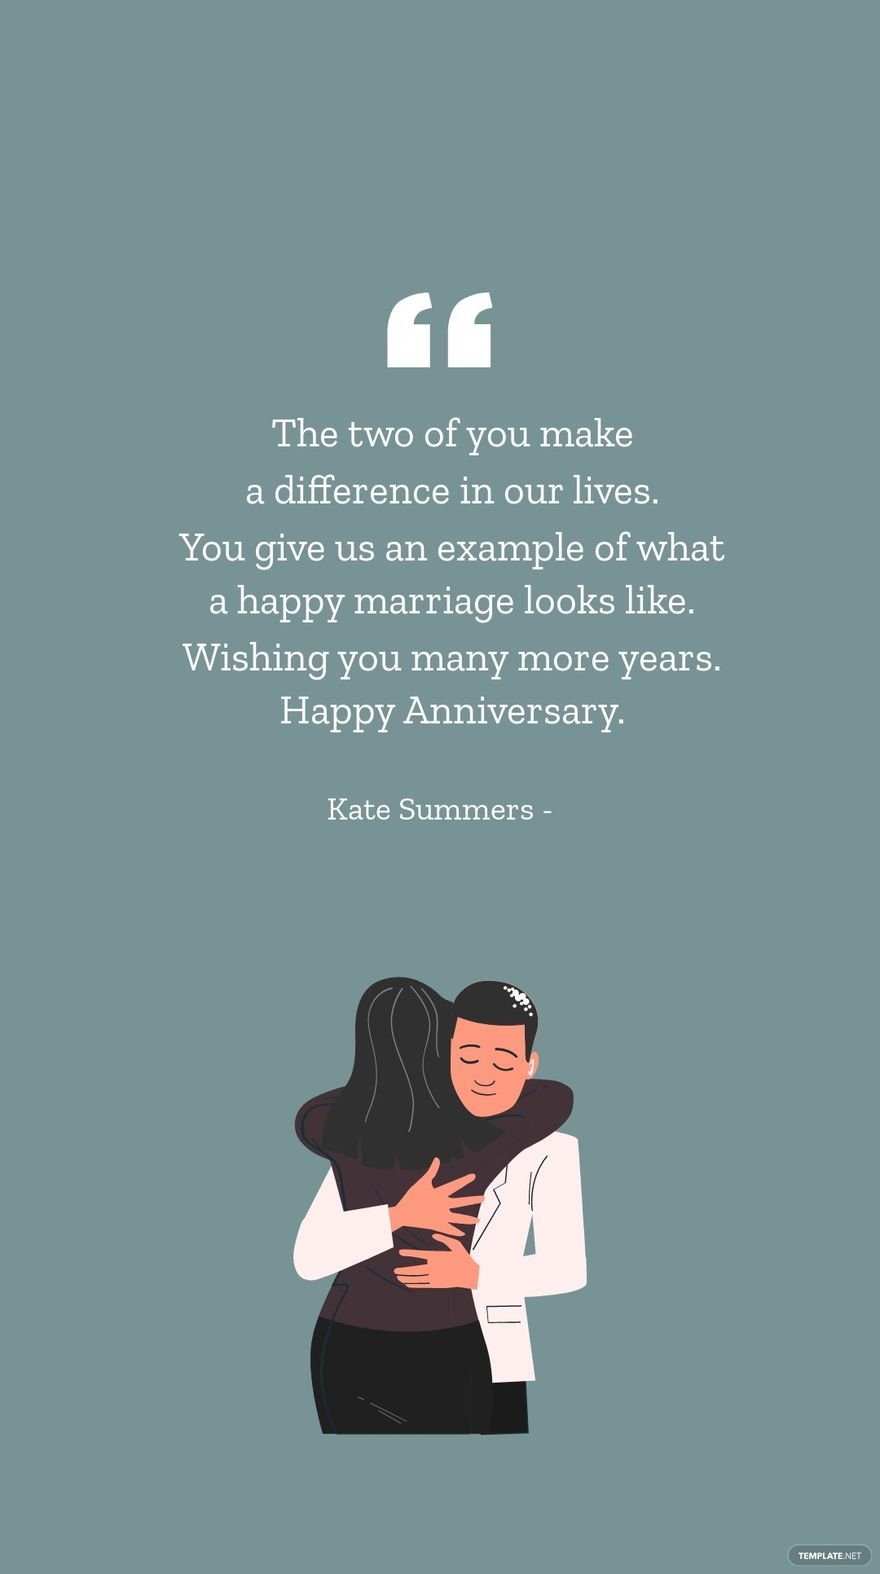 Kate Summers - The two of you make a difference in our lives. You give us an example of what a happy marriage looks like. Wishing you many more years. Happy Anniversary. in JPG